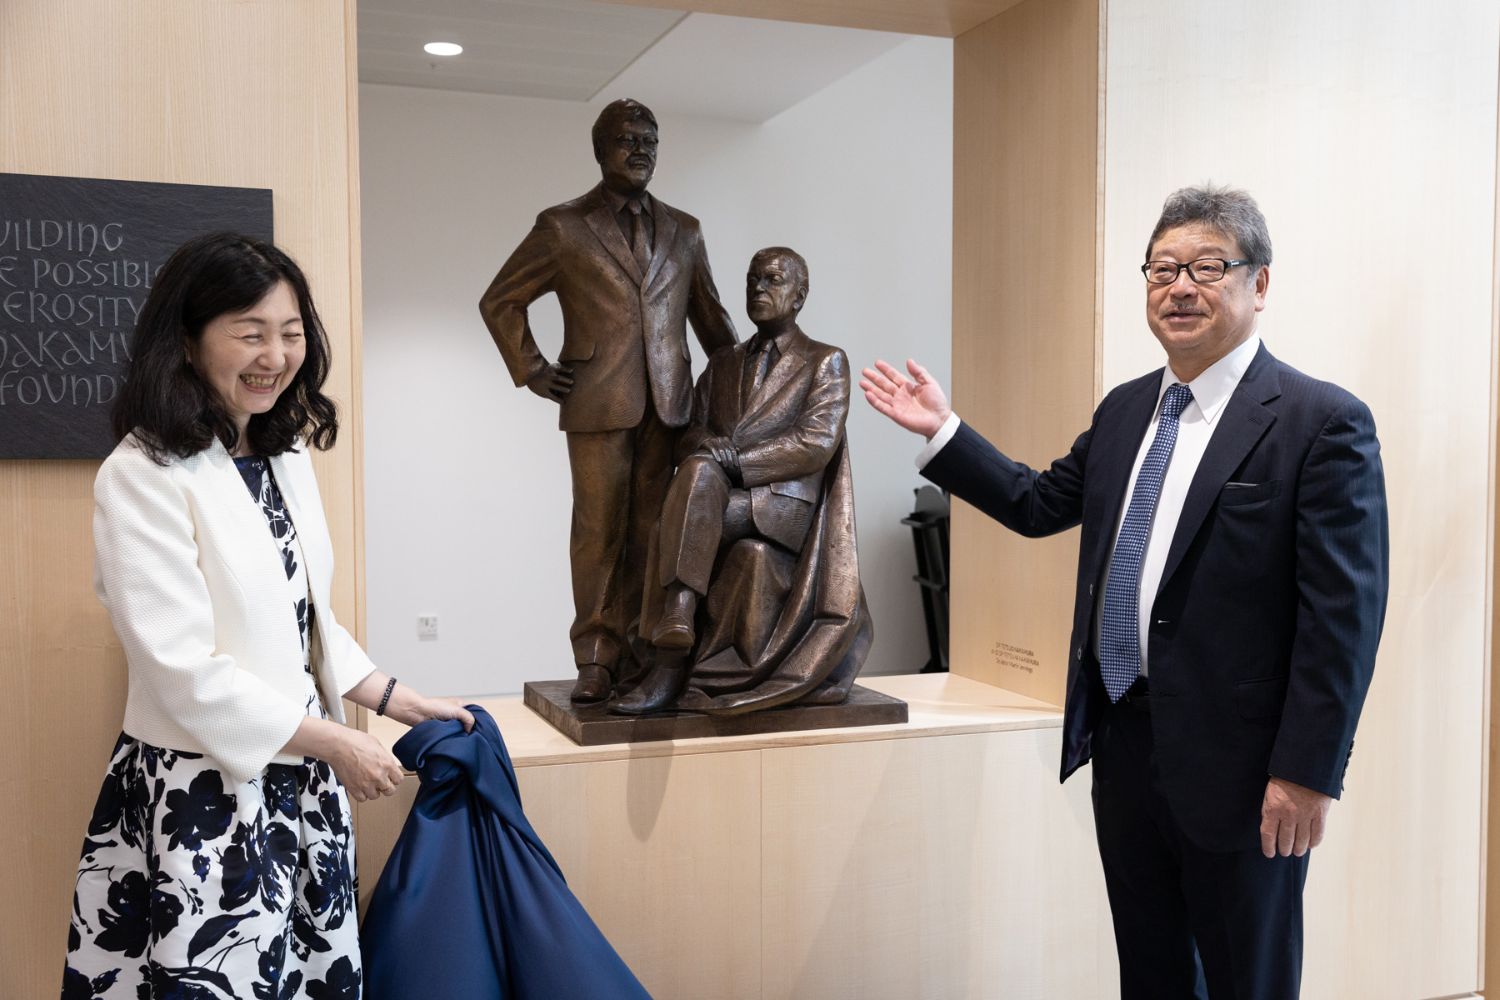 <p>Mr and Mrs Nakamura unveil the statue of Dr Tetsuo Nakamura and Dr Tetsuya Nakamura by Sculptor Martin Jennings</p>

<p><em><span class="reduce_font_size">Image credit: Cyrus Mower Photography</span></em></p>
